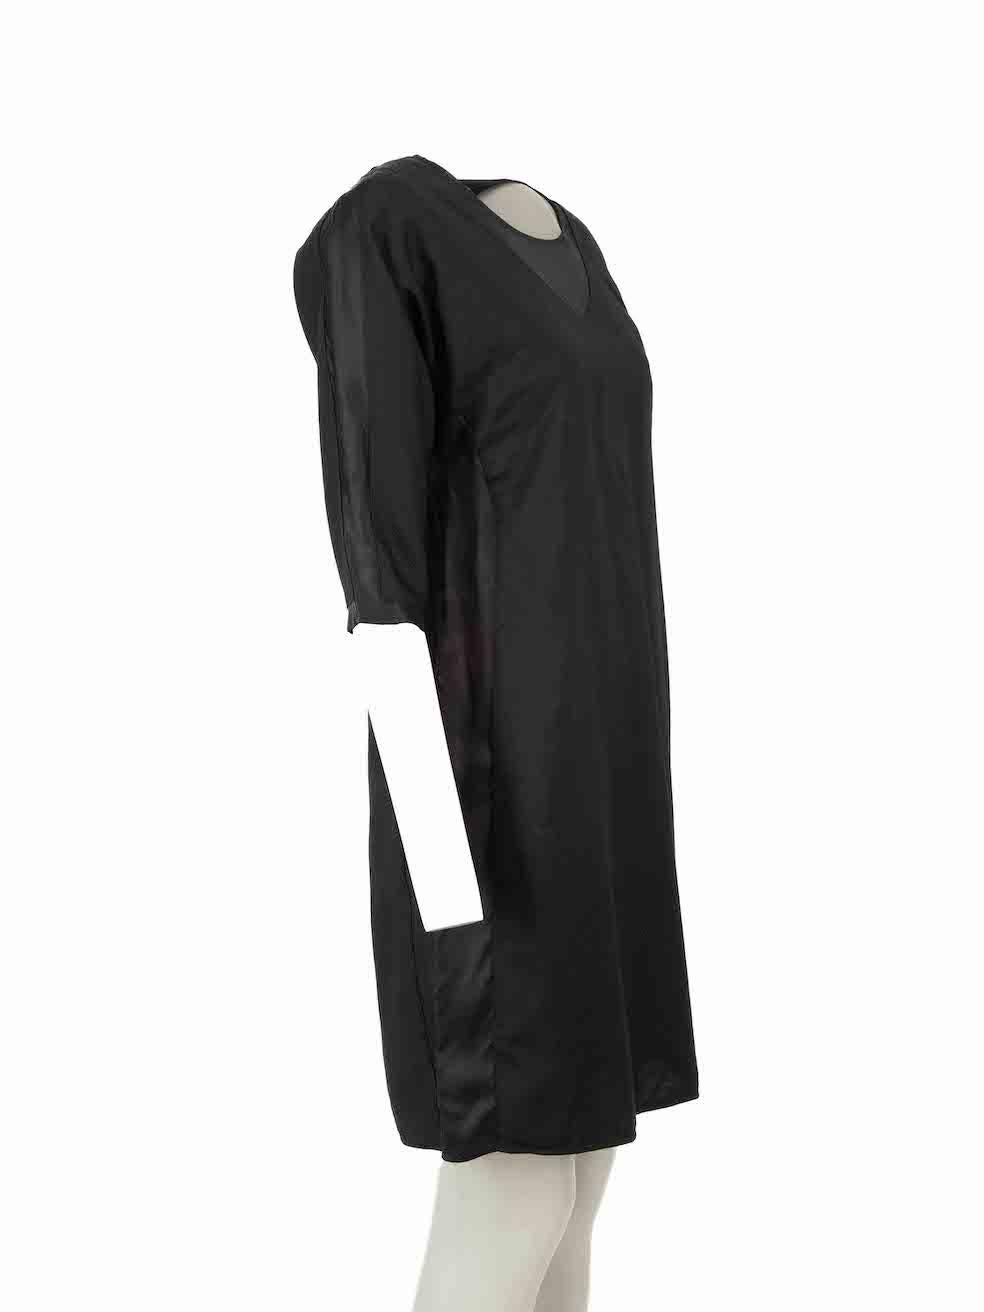 CONDITION is Very good. Minimal wear to dress is evident. Minor pulls to overall fabric on this used MM6 Maison Margiela designer resale item.
 
Details
Black
Wool
Shift dress
Knee length
Round neckline
Contrast panelled
Back zip closure

Made in